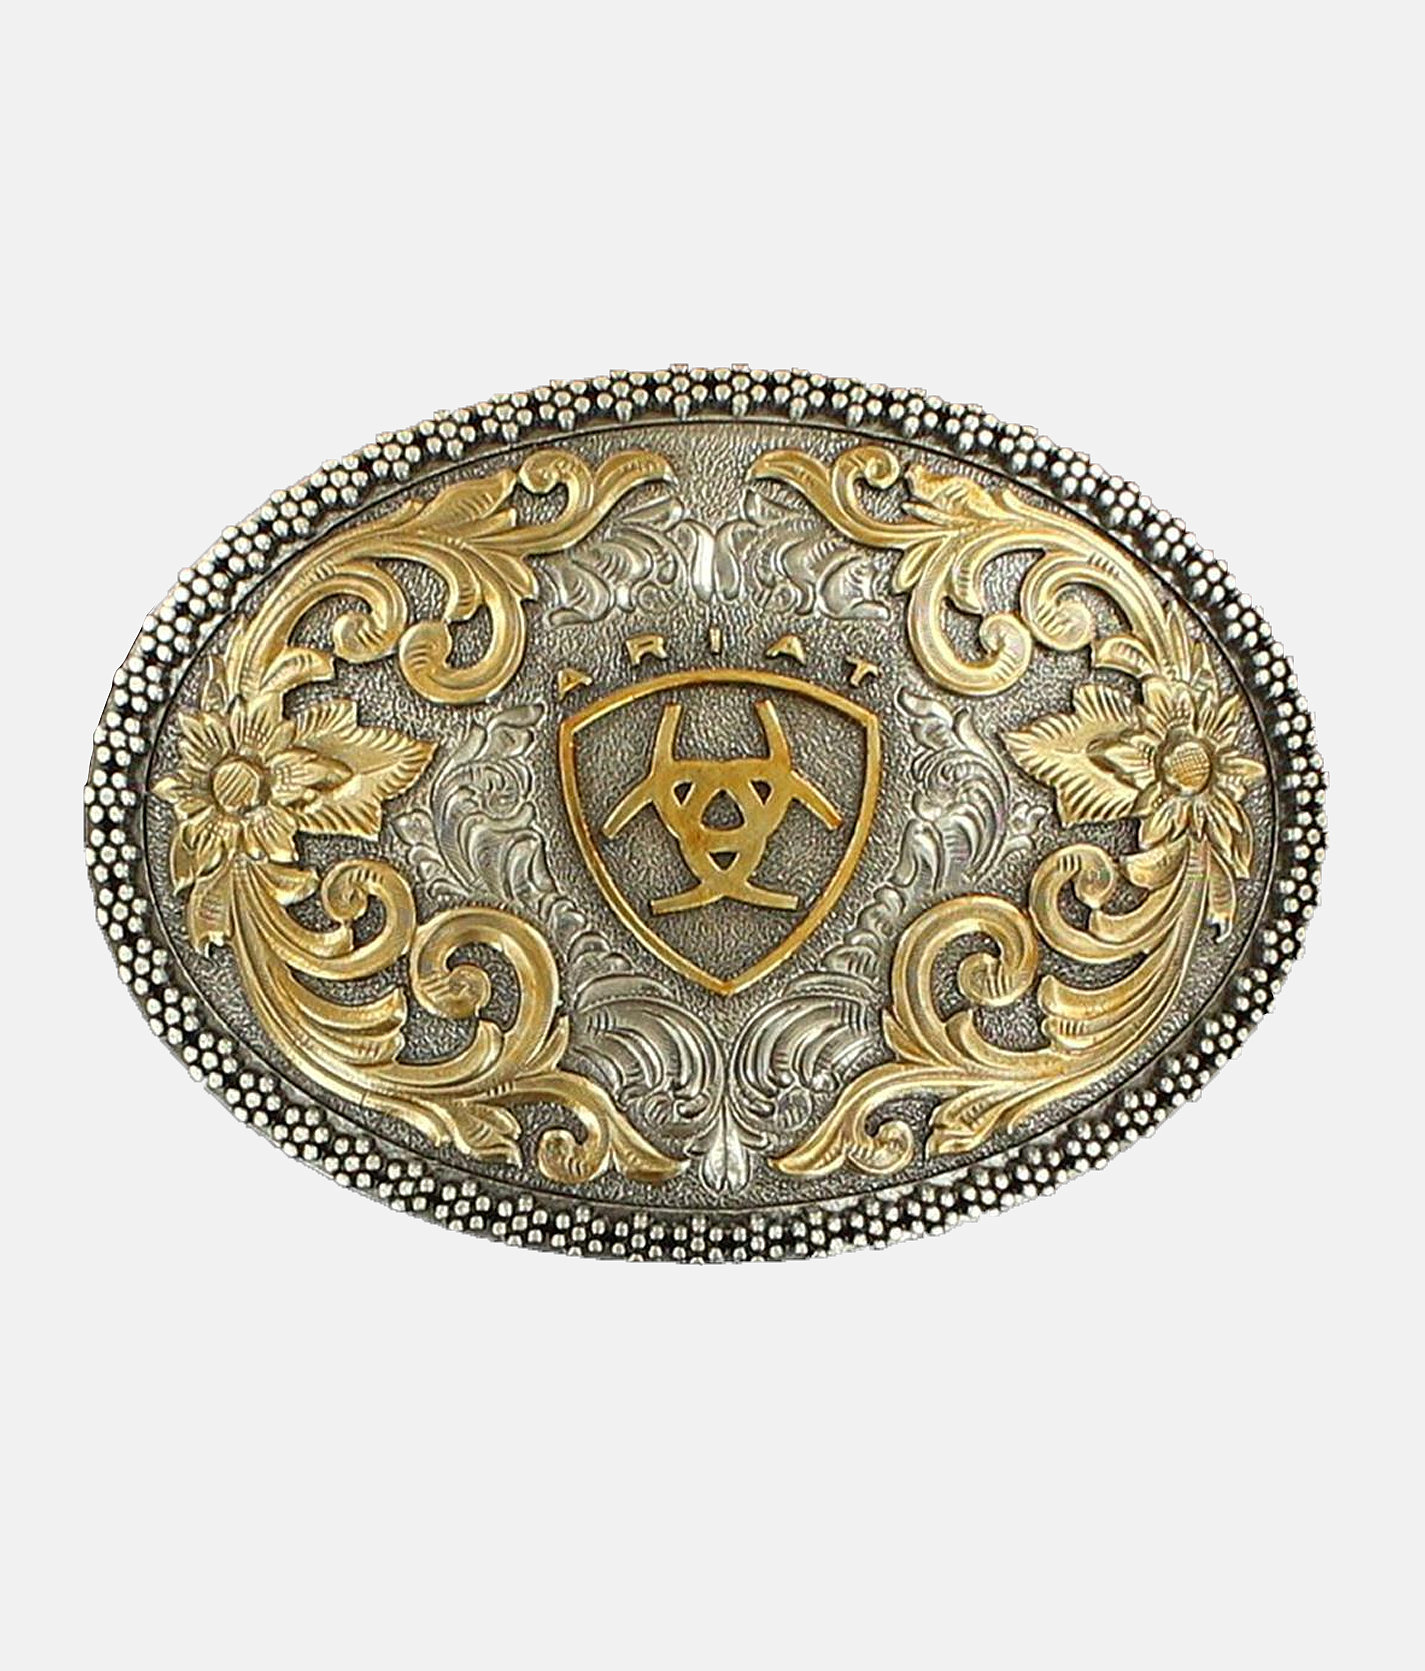 belt buckles and accessories